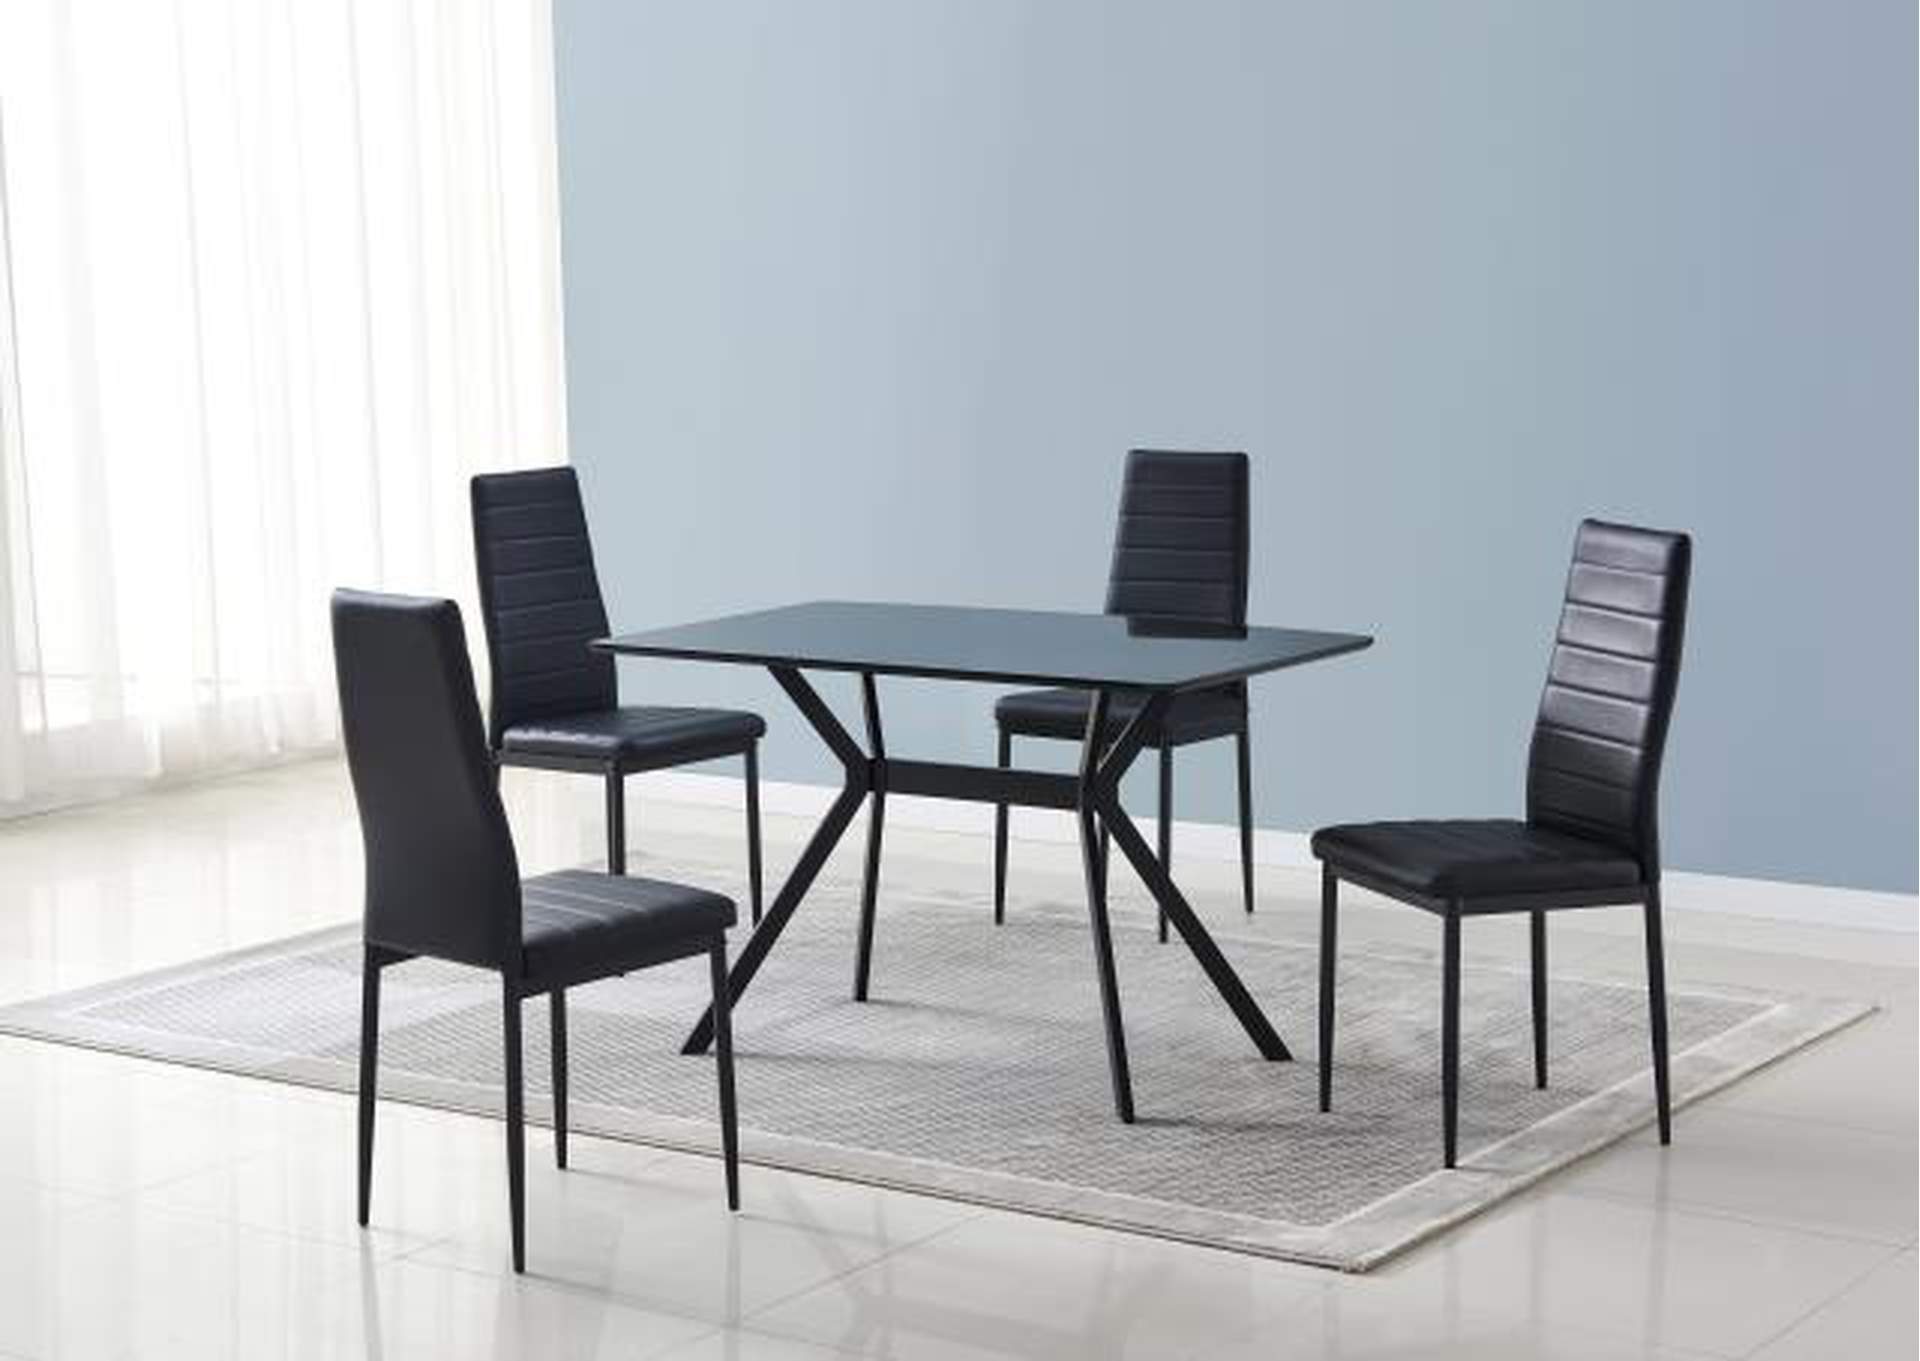 D2228K - 5 In 1 5 Piece Dining Set Black 5 In 1,Global Trading